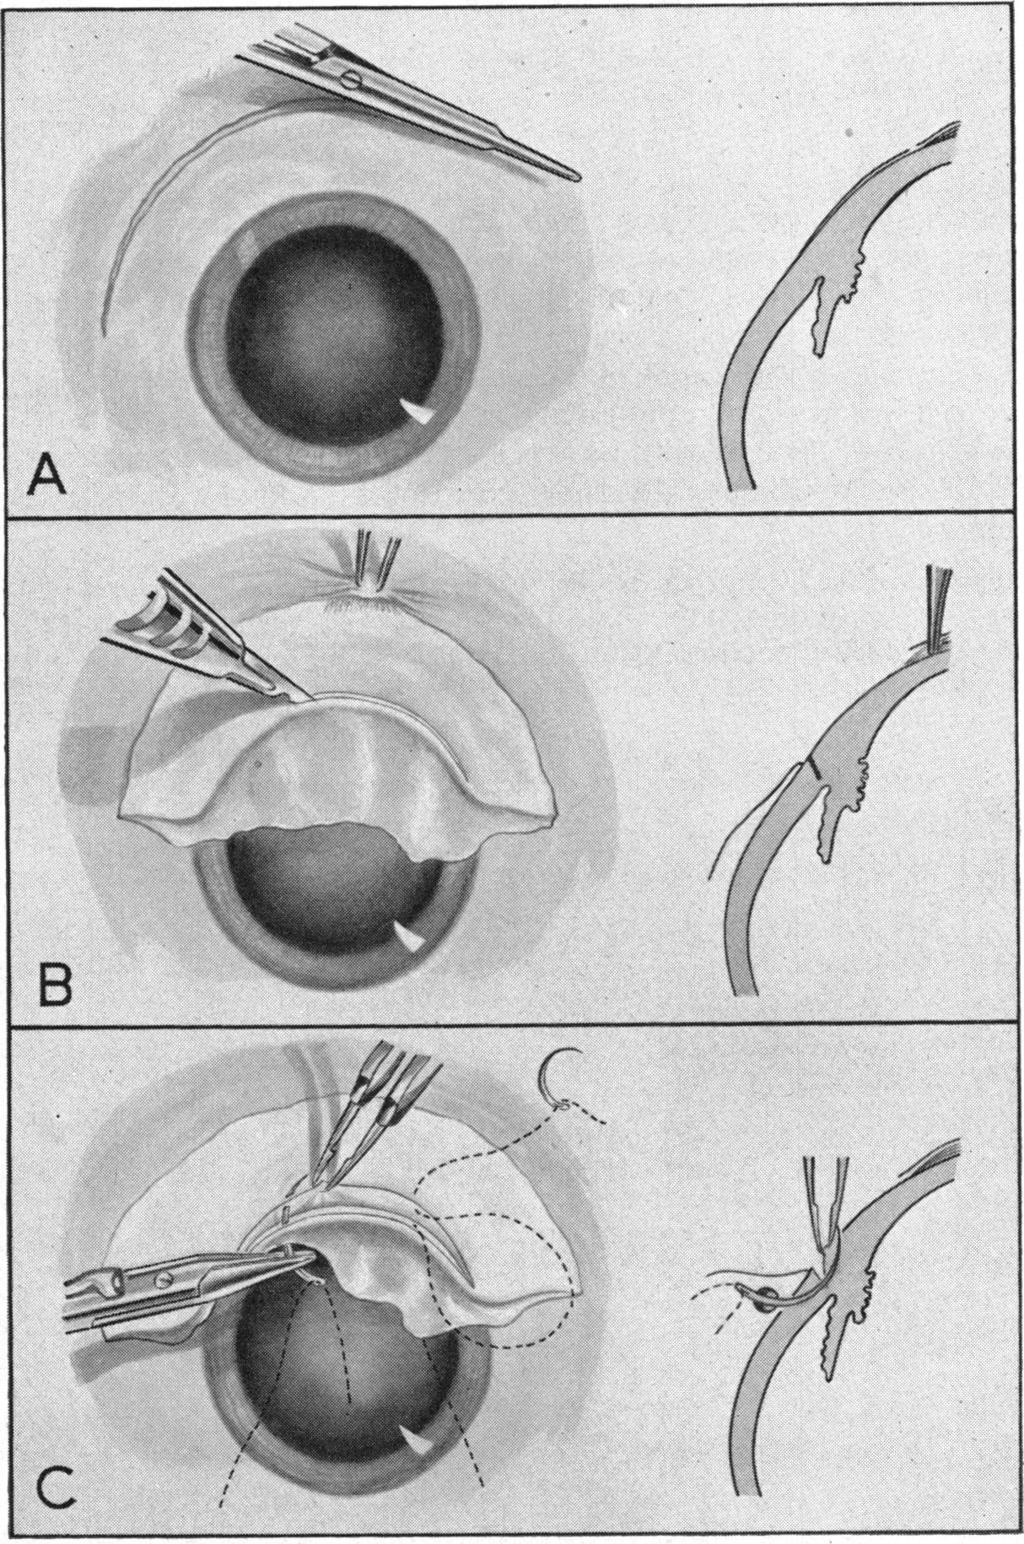 SCALPEL AND SCISSORS 515 Br J Ophthalmol: first published as 10.1136/bjo.43.9.513 on 1 September 1959. Downloaded from http://bjo.bmj.com/ the wound and not under the fibres forming the floor.